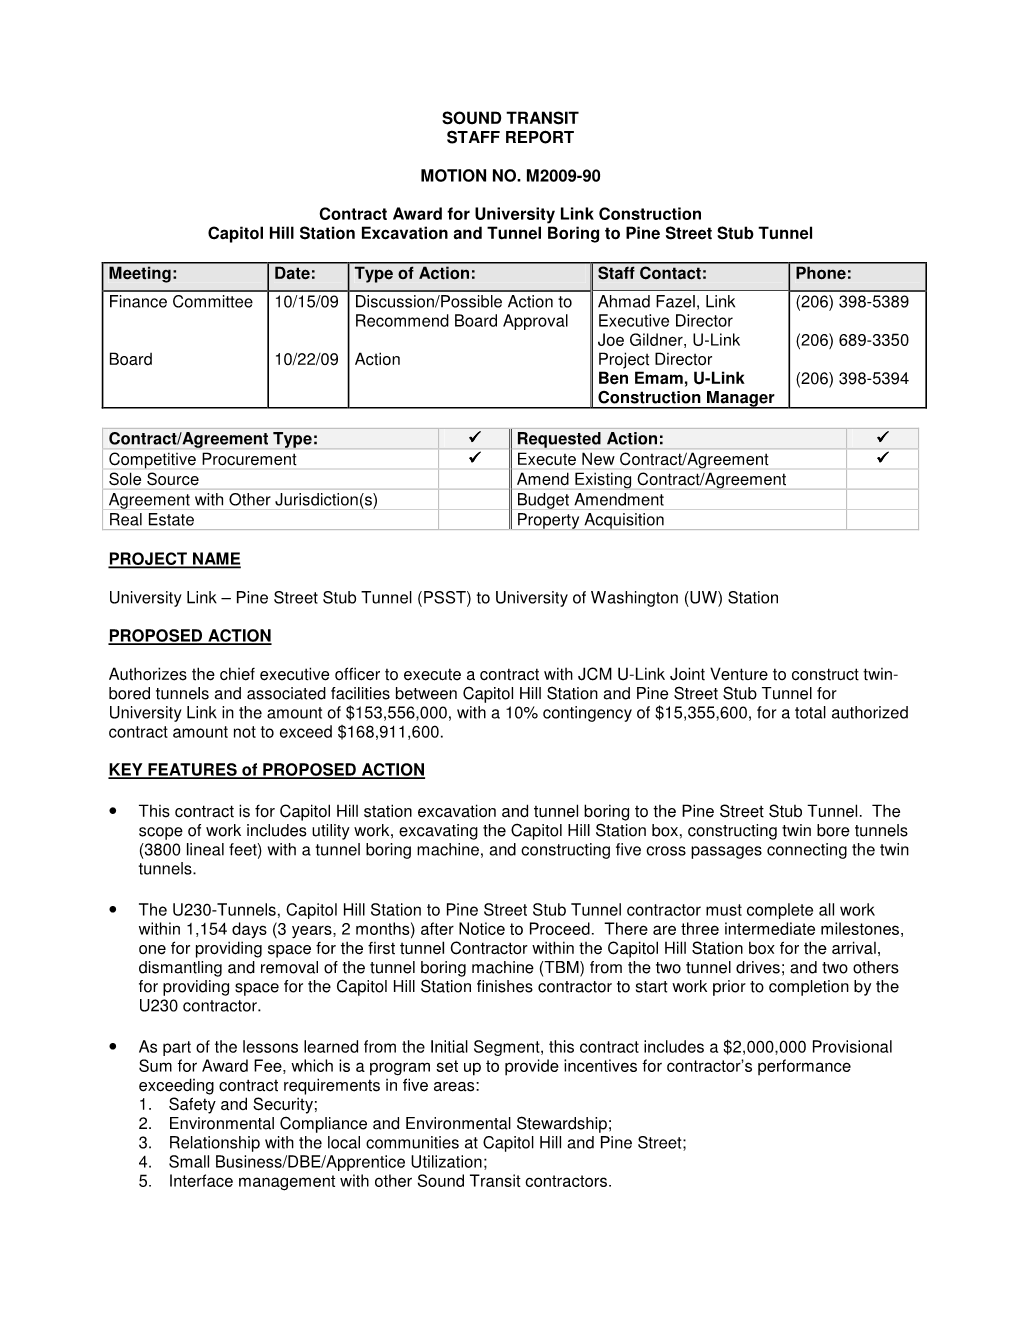 SOUND TRANSIT STAFF REPORT MOTION NO. M2009-90 Contract Award for University Link Construction Capitol Hill Station Excavation A